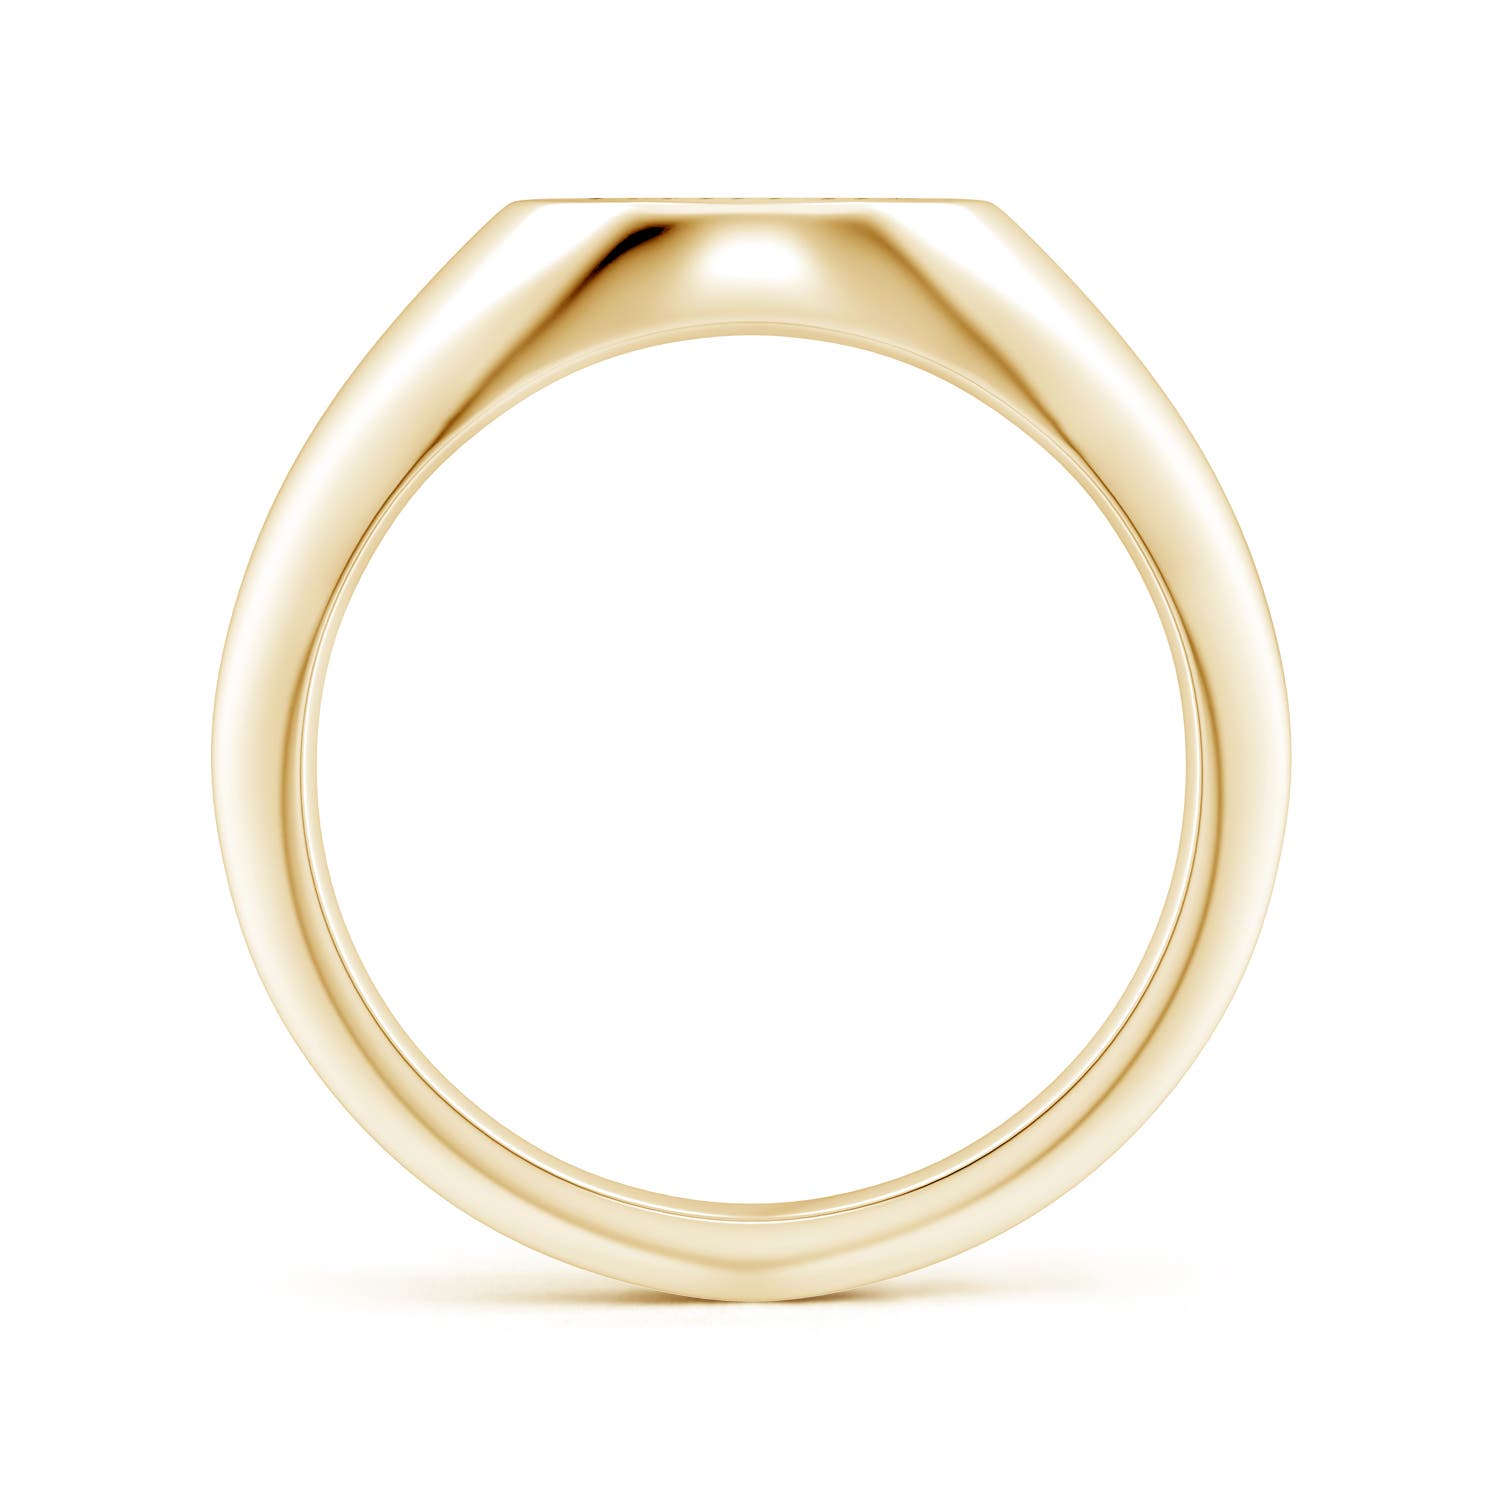 H, SI2 / 0.01 CT / 14 KT Yellow Gold